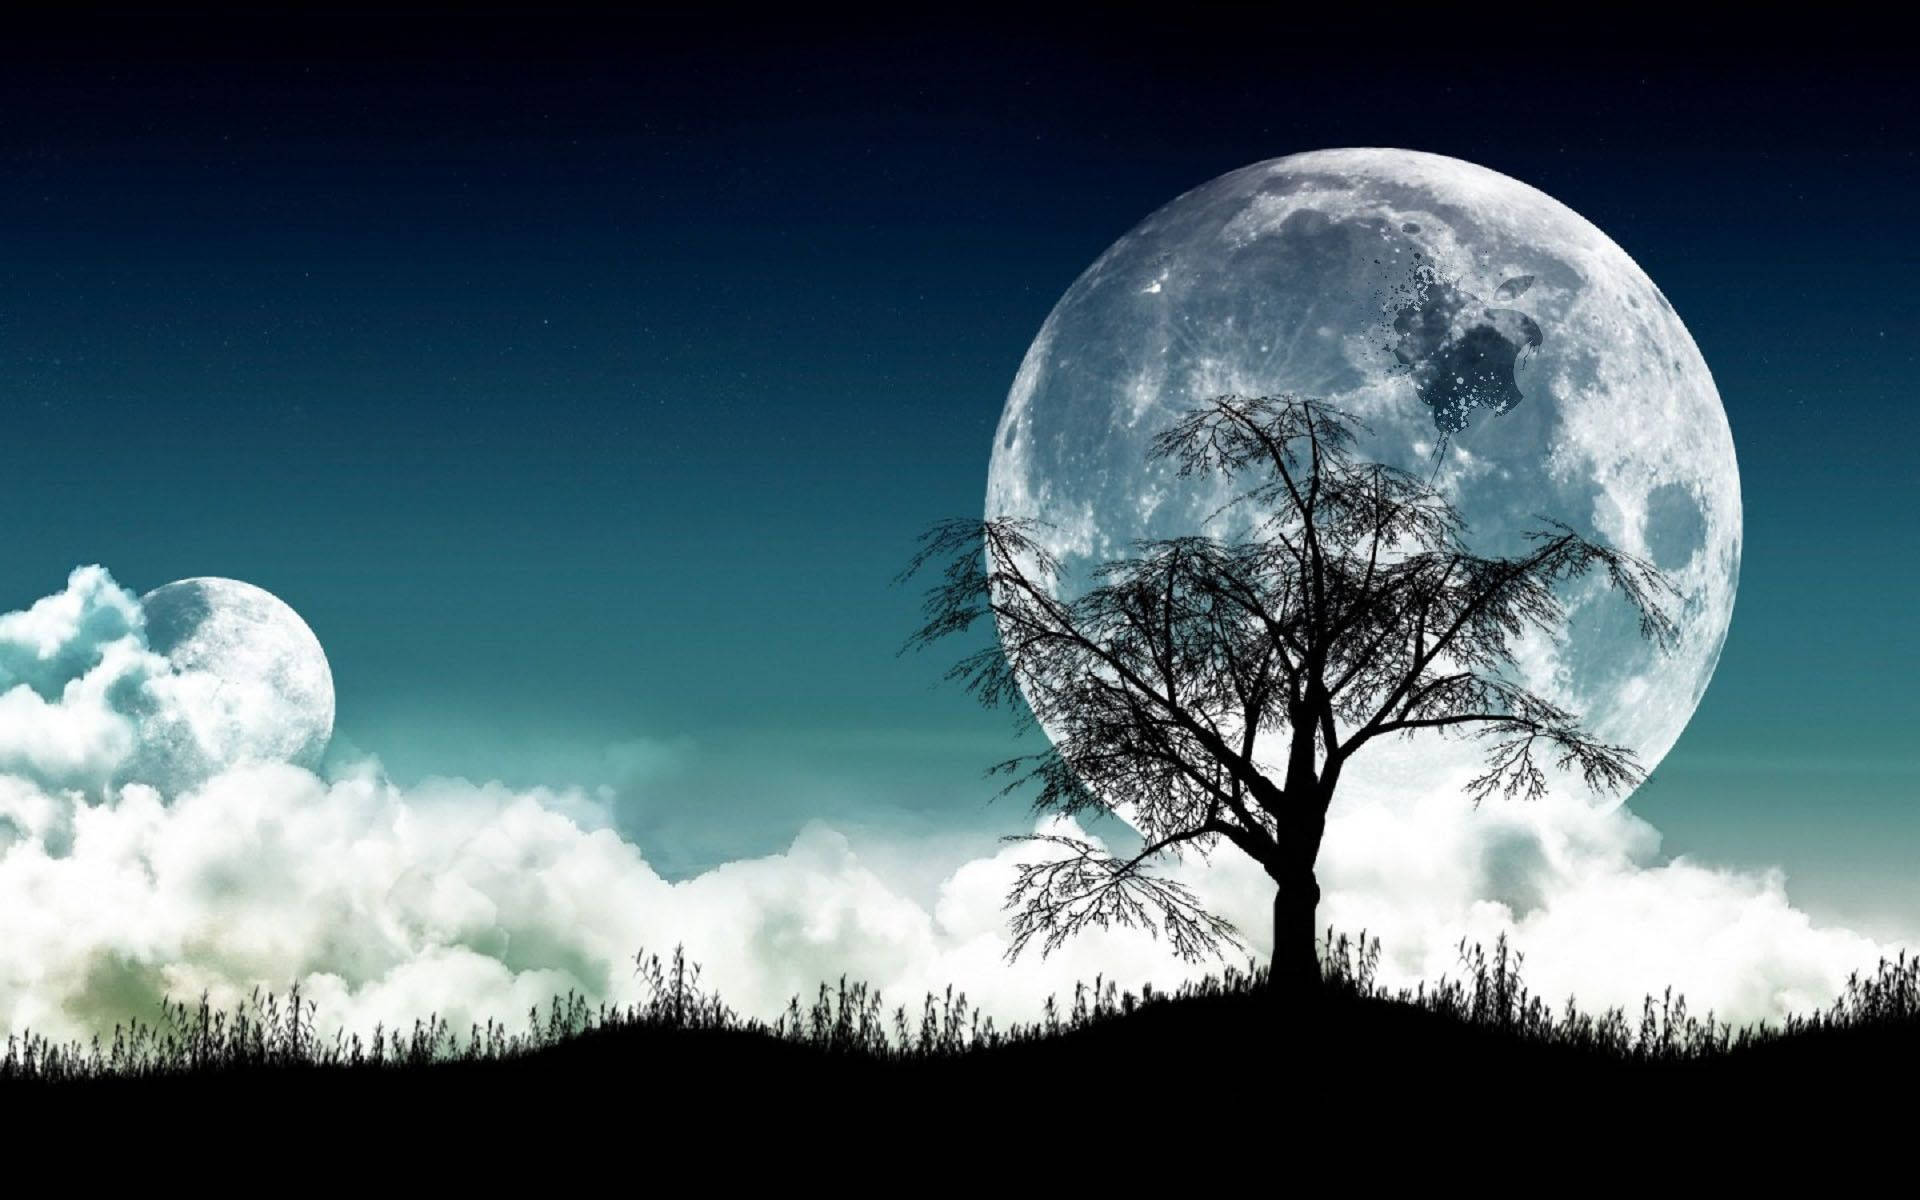 A Majestic Full Moon Shining High in the Night Sky Wallpaper